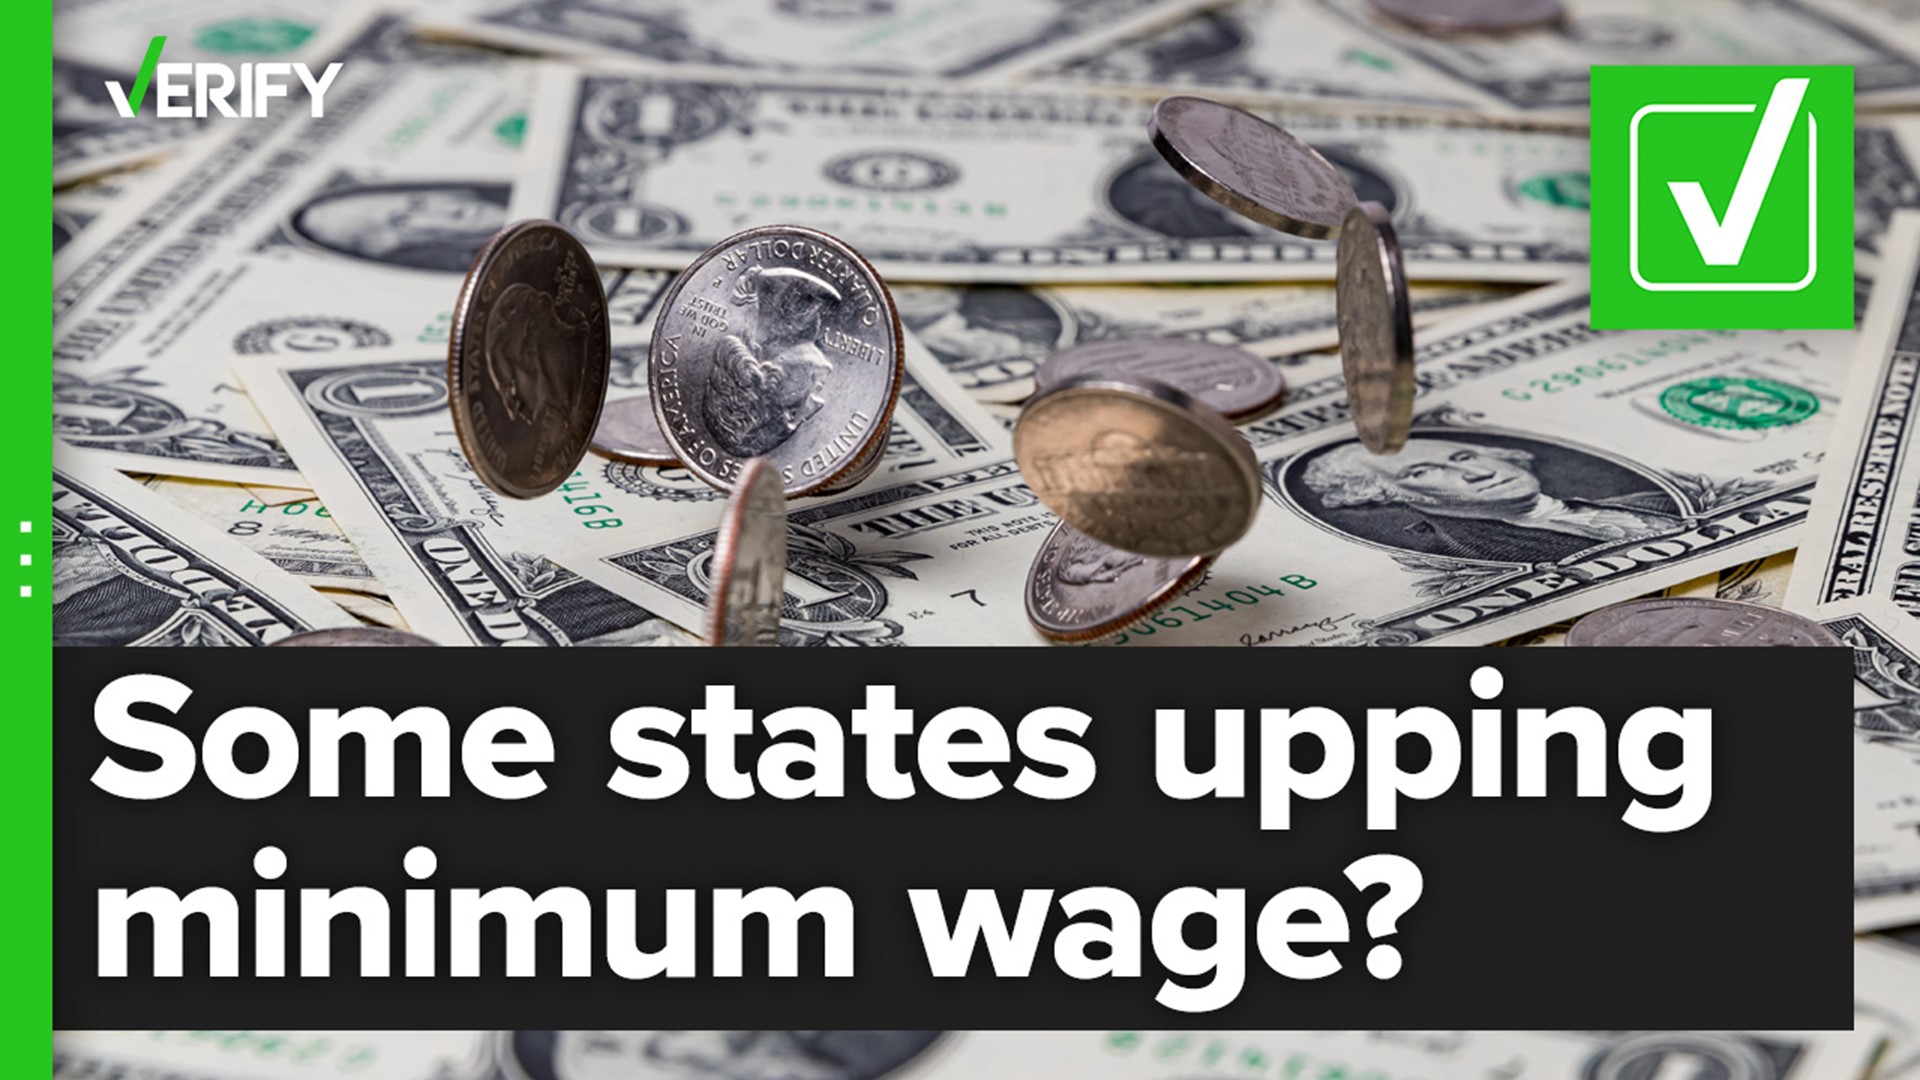 The federal minimum wage isn’t changing and remains $7.25 an hour.